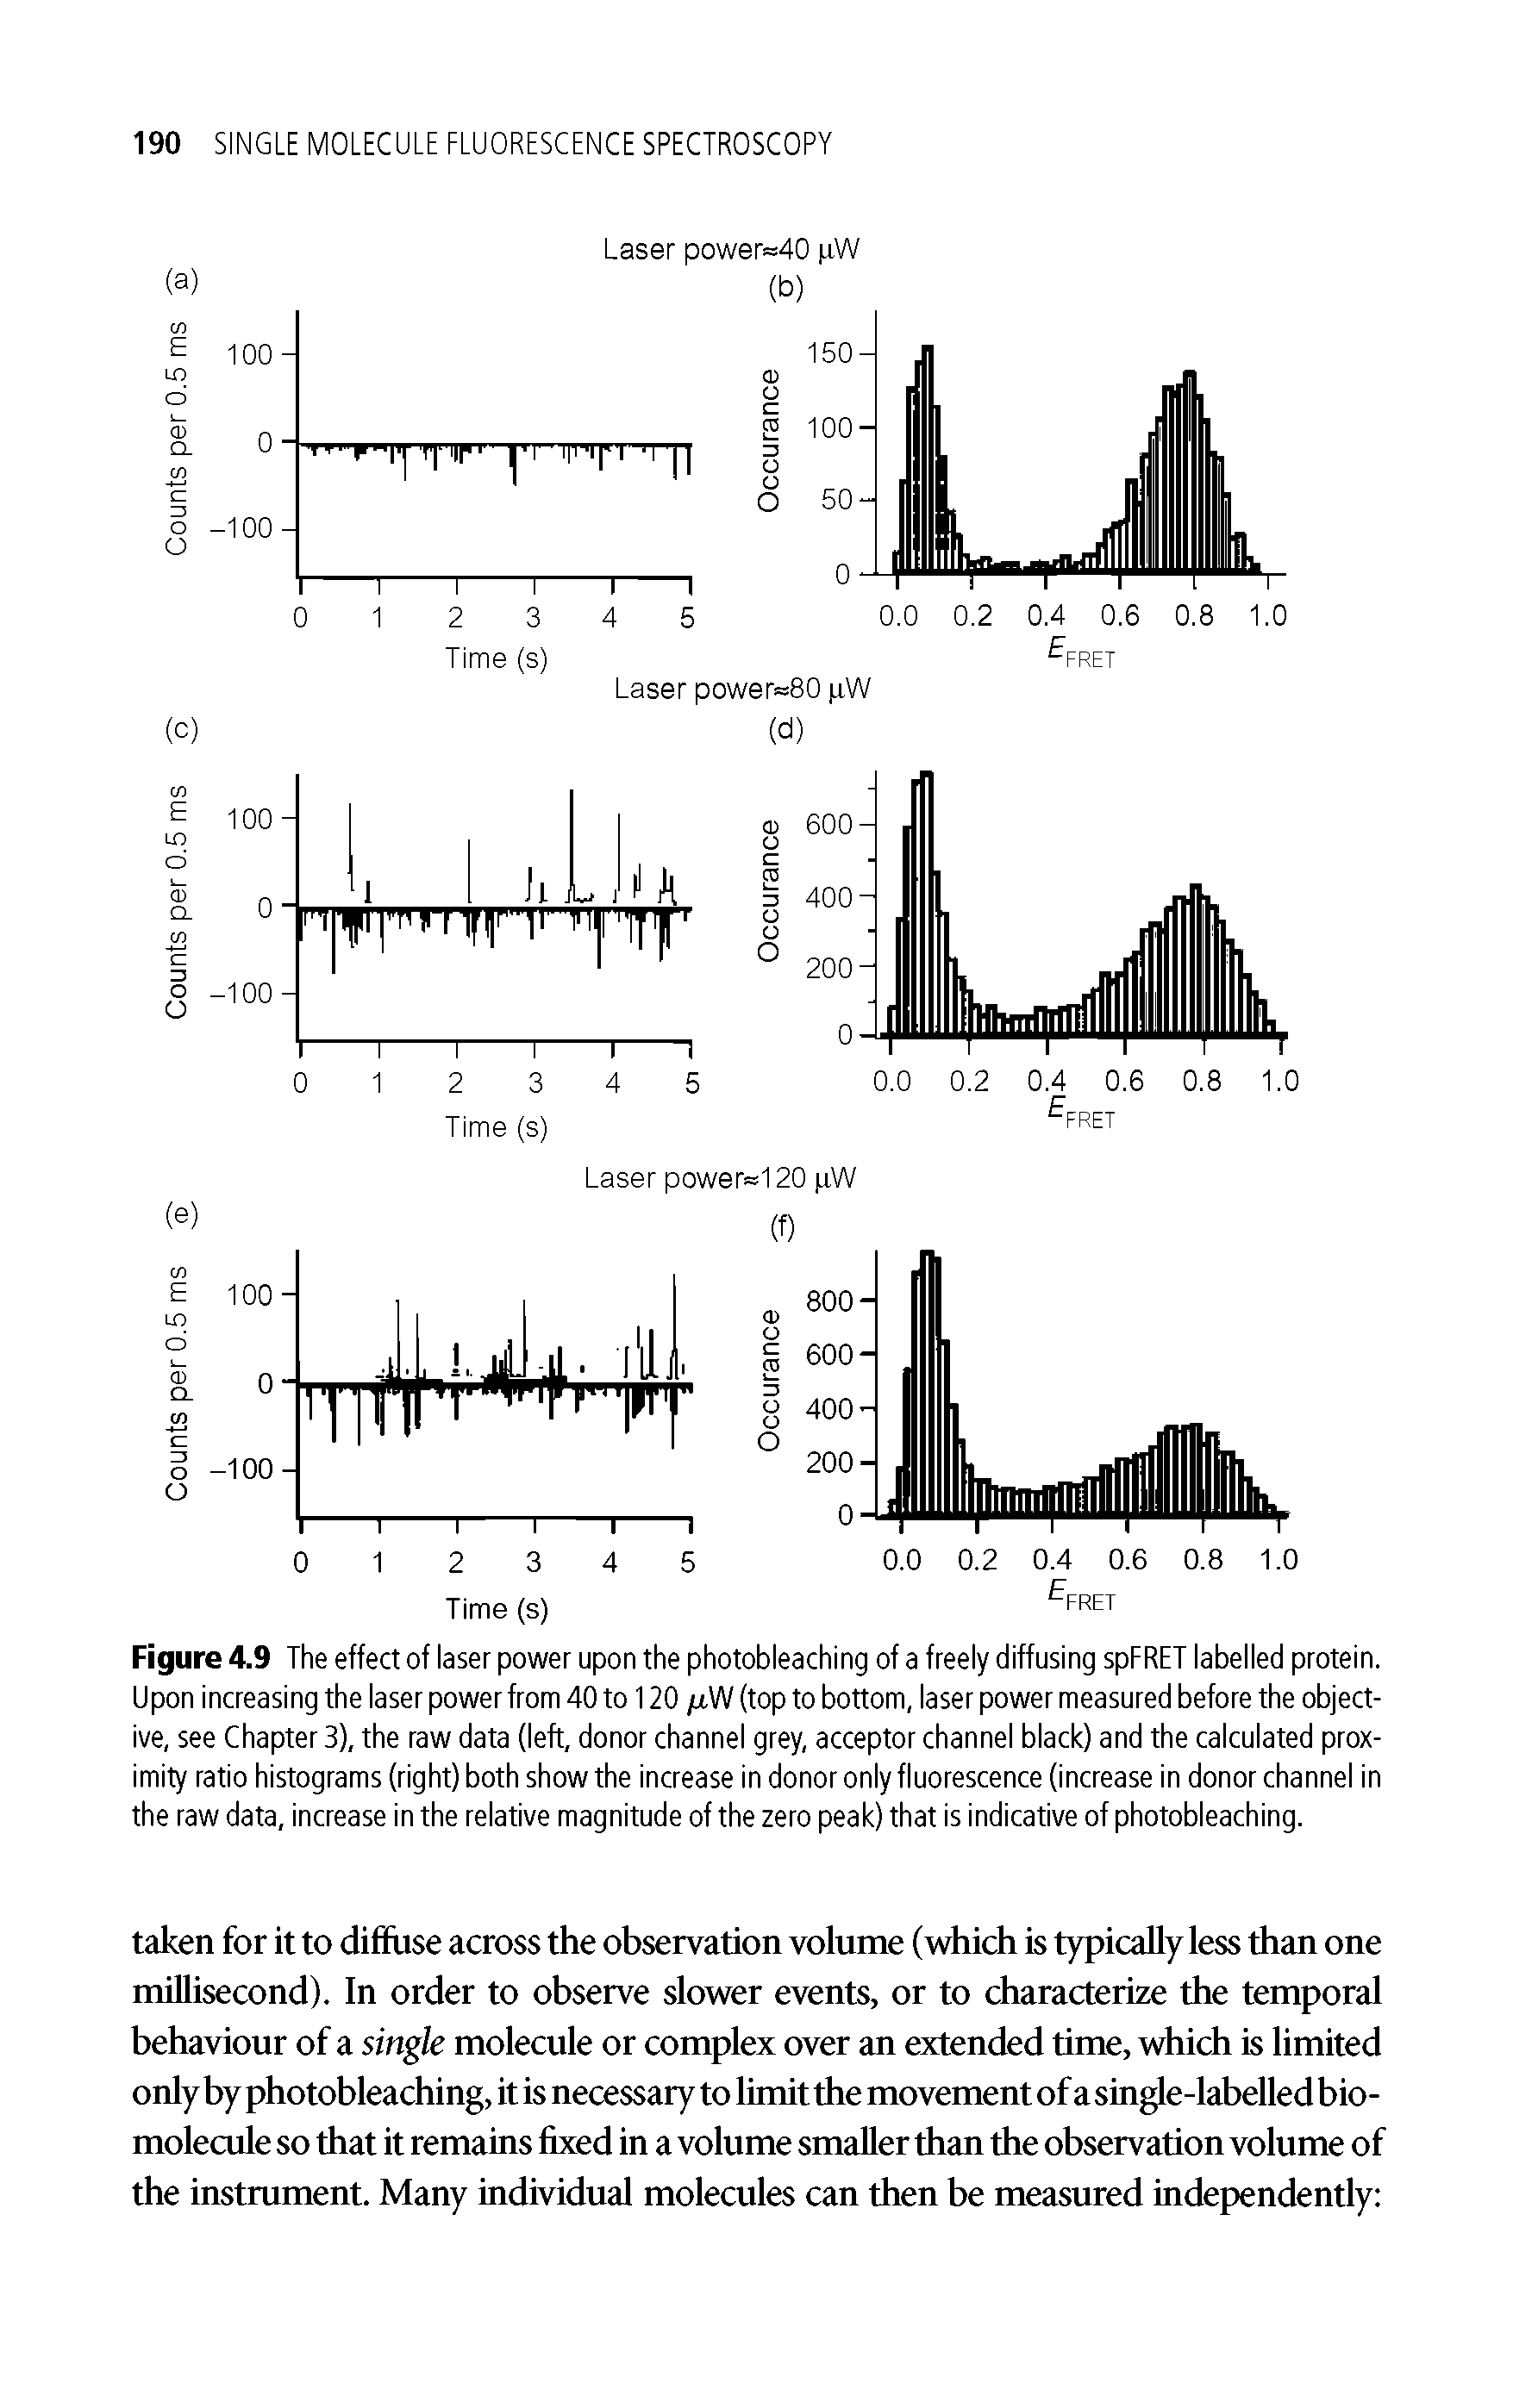 Figure 4.9 The effect of laser power upon the photobleaching of a freely diffusing spFRET labelled protein. Upon increasing the laser power from 40 to 120 /u,W (top to bottom, laser power measured before the objective, see Chapter 3), the raw data (left, donor channel grey, acceptor channel black) and the calculated proximity ratio histograms (right) both show the increase in donor only fluorescence (increase in donor channel in the raw data, increase in the relative magnitude of the zero peak) that is indicative of photobleaching.